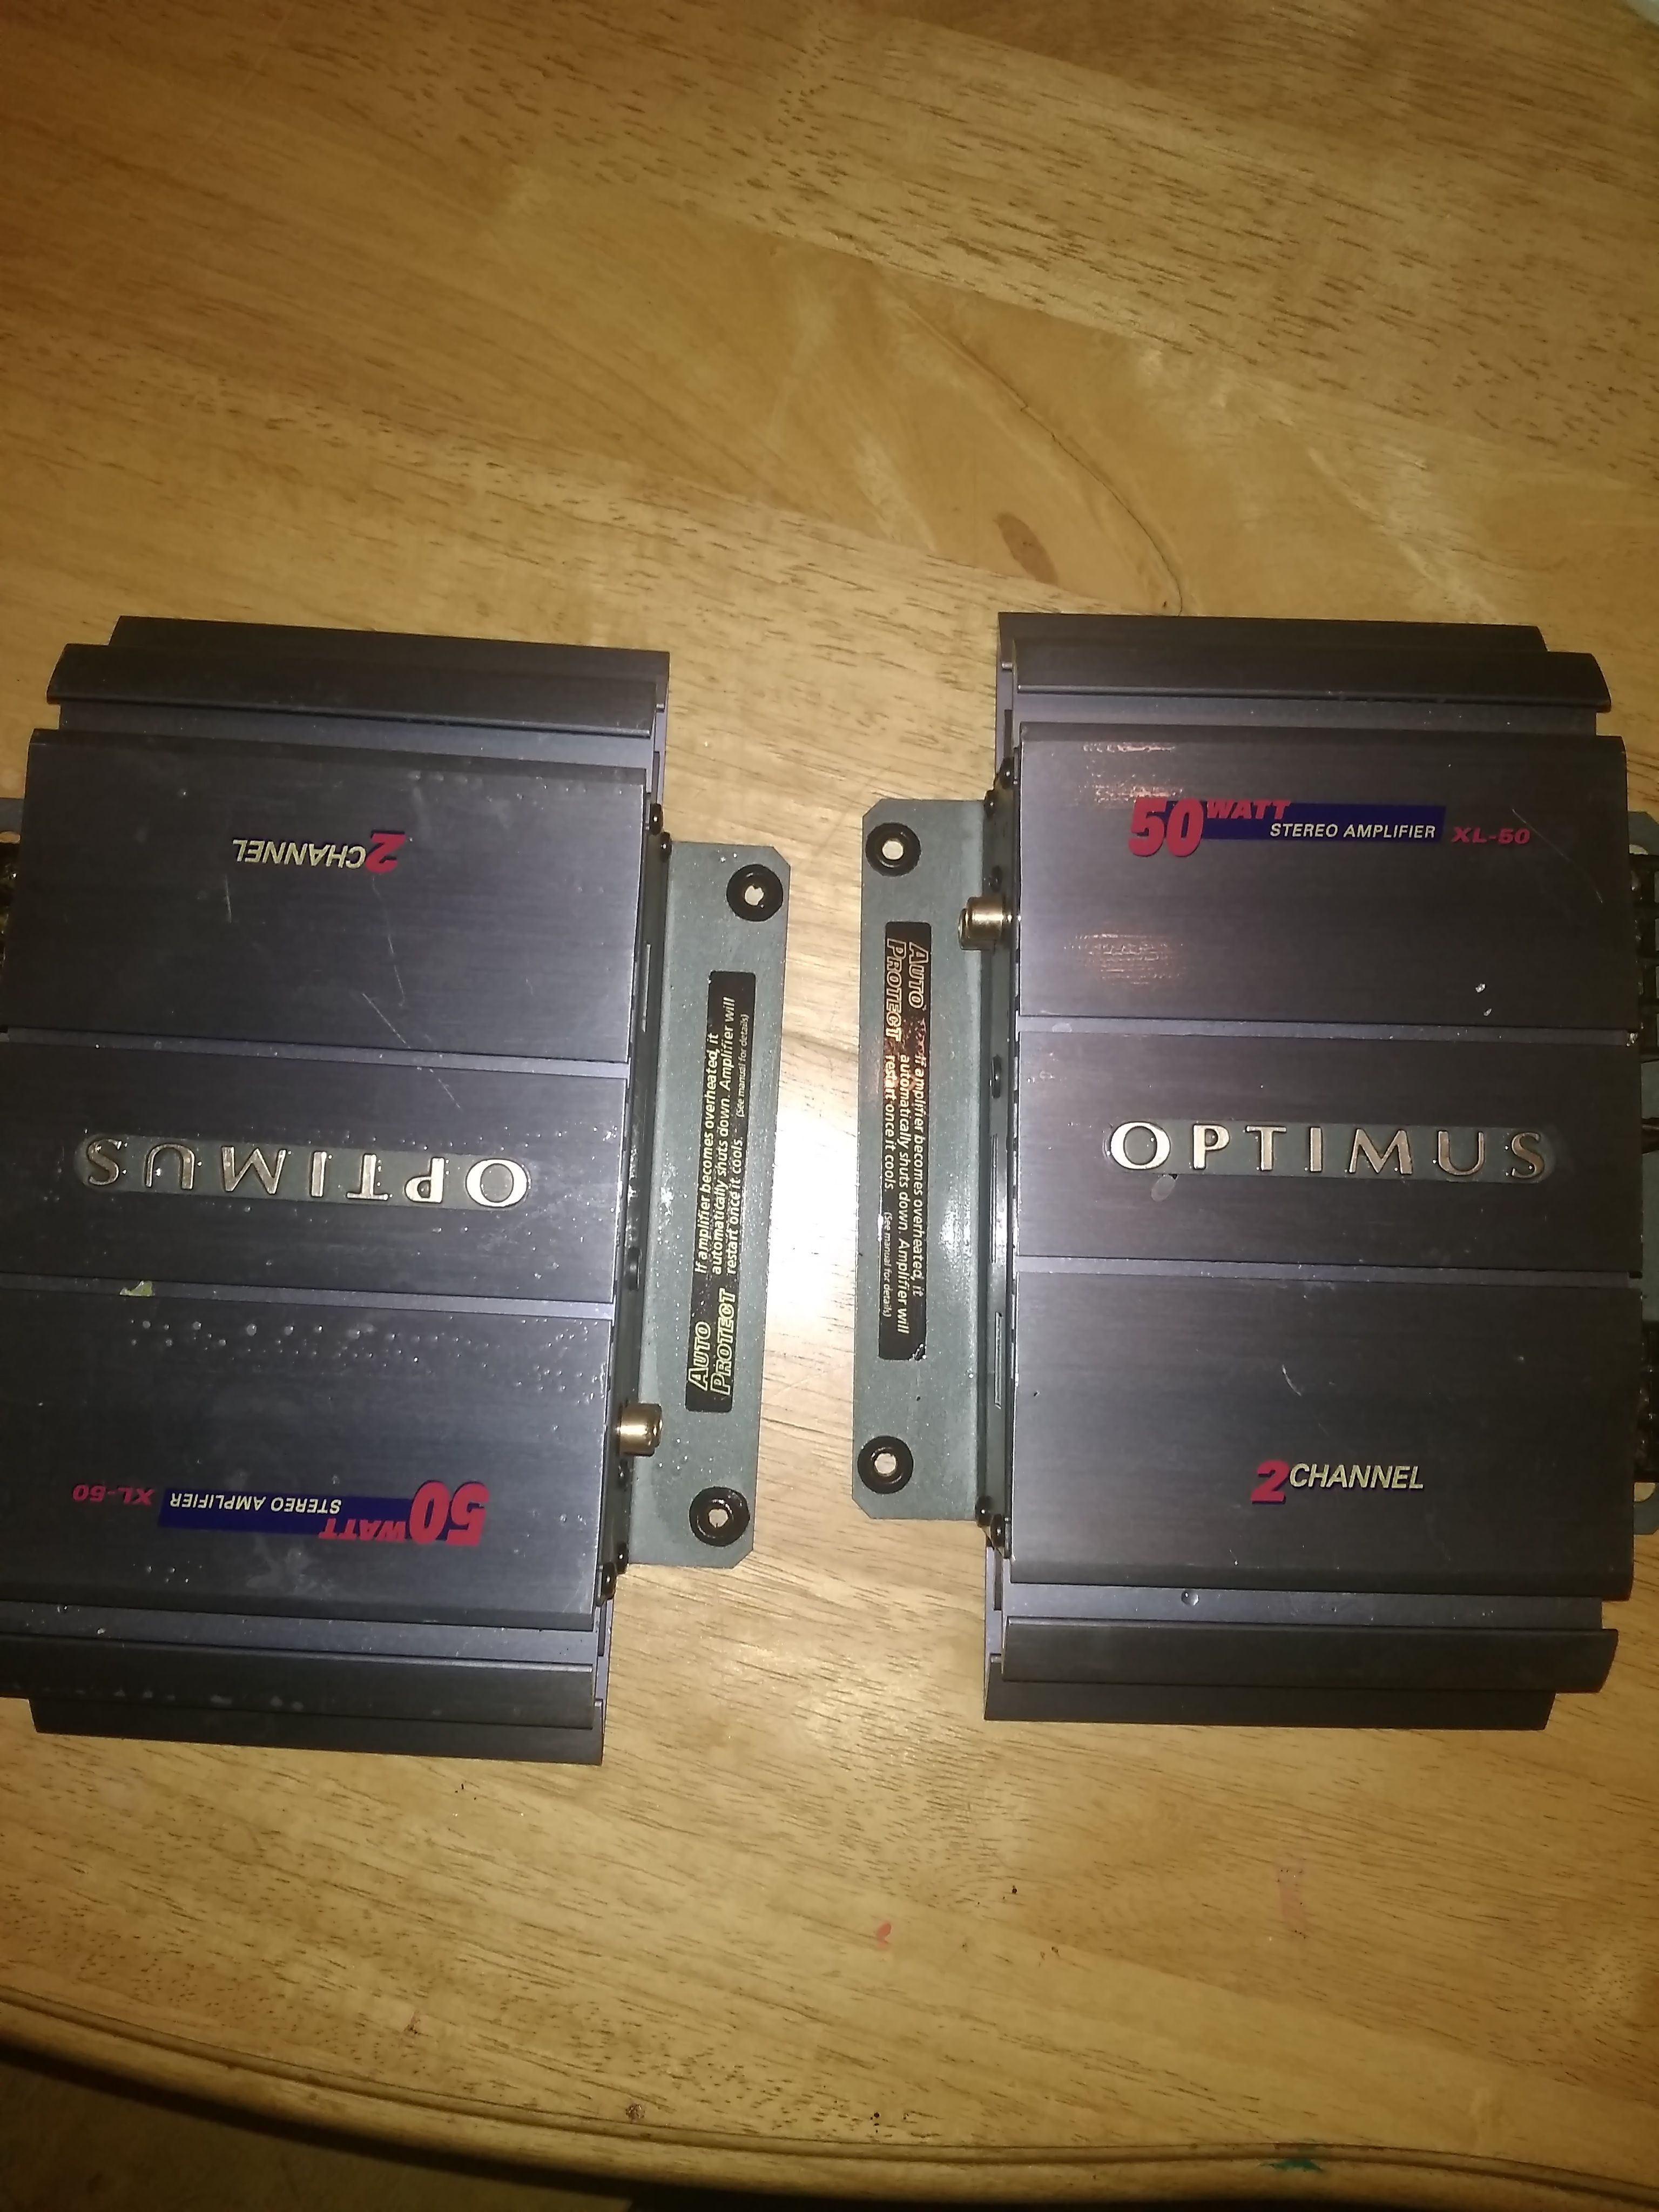 I have to amps for audio for car don't need them